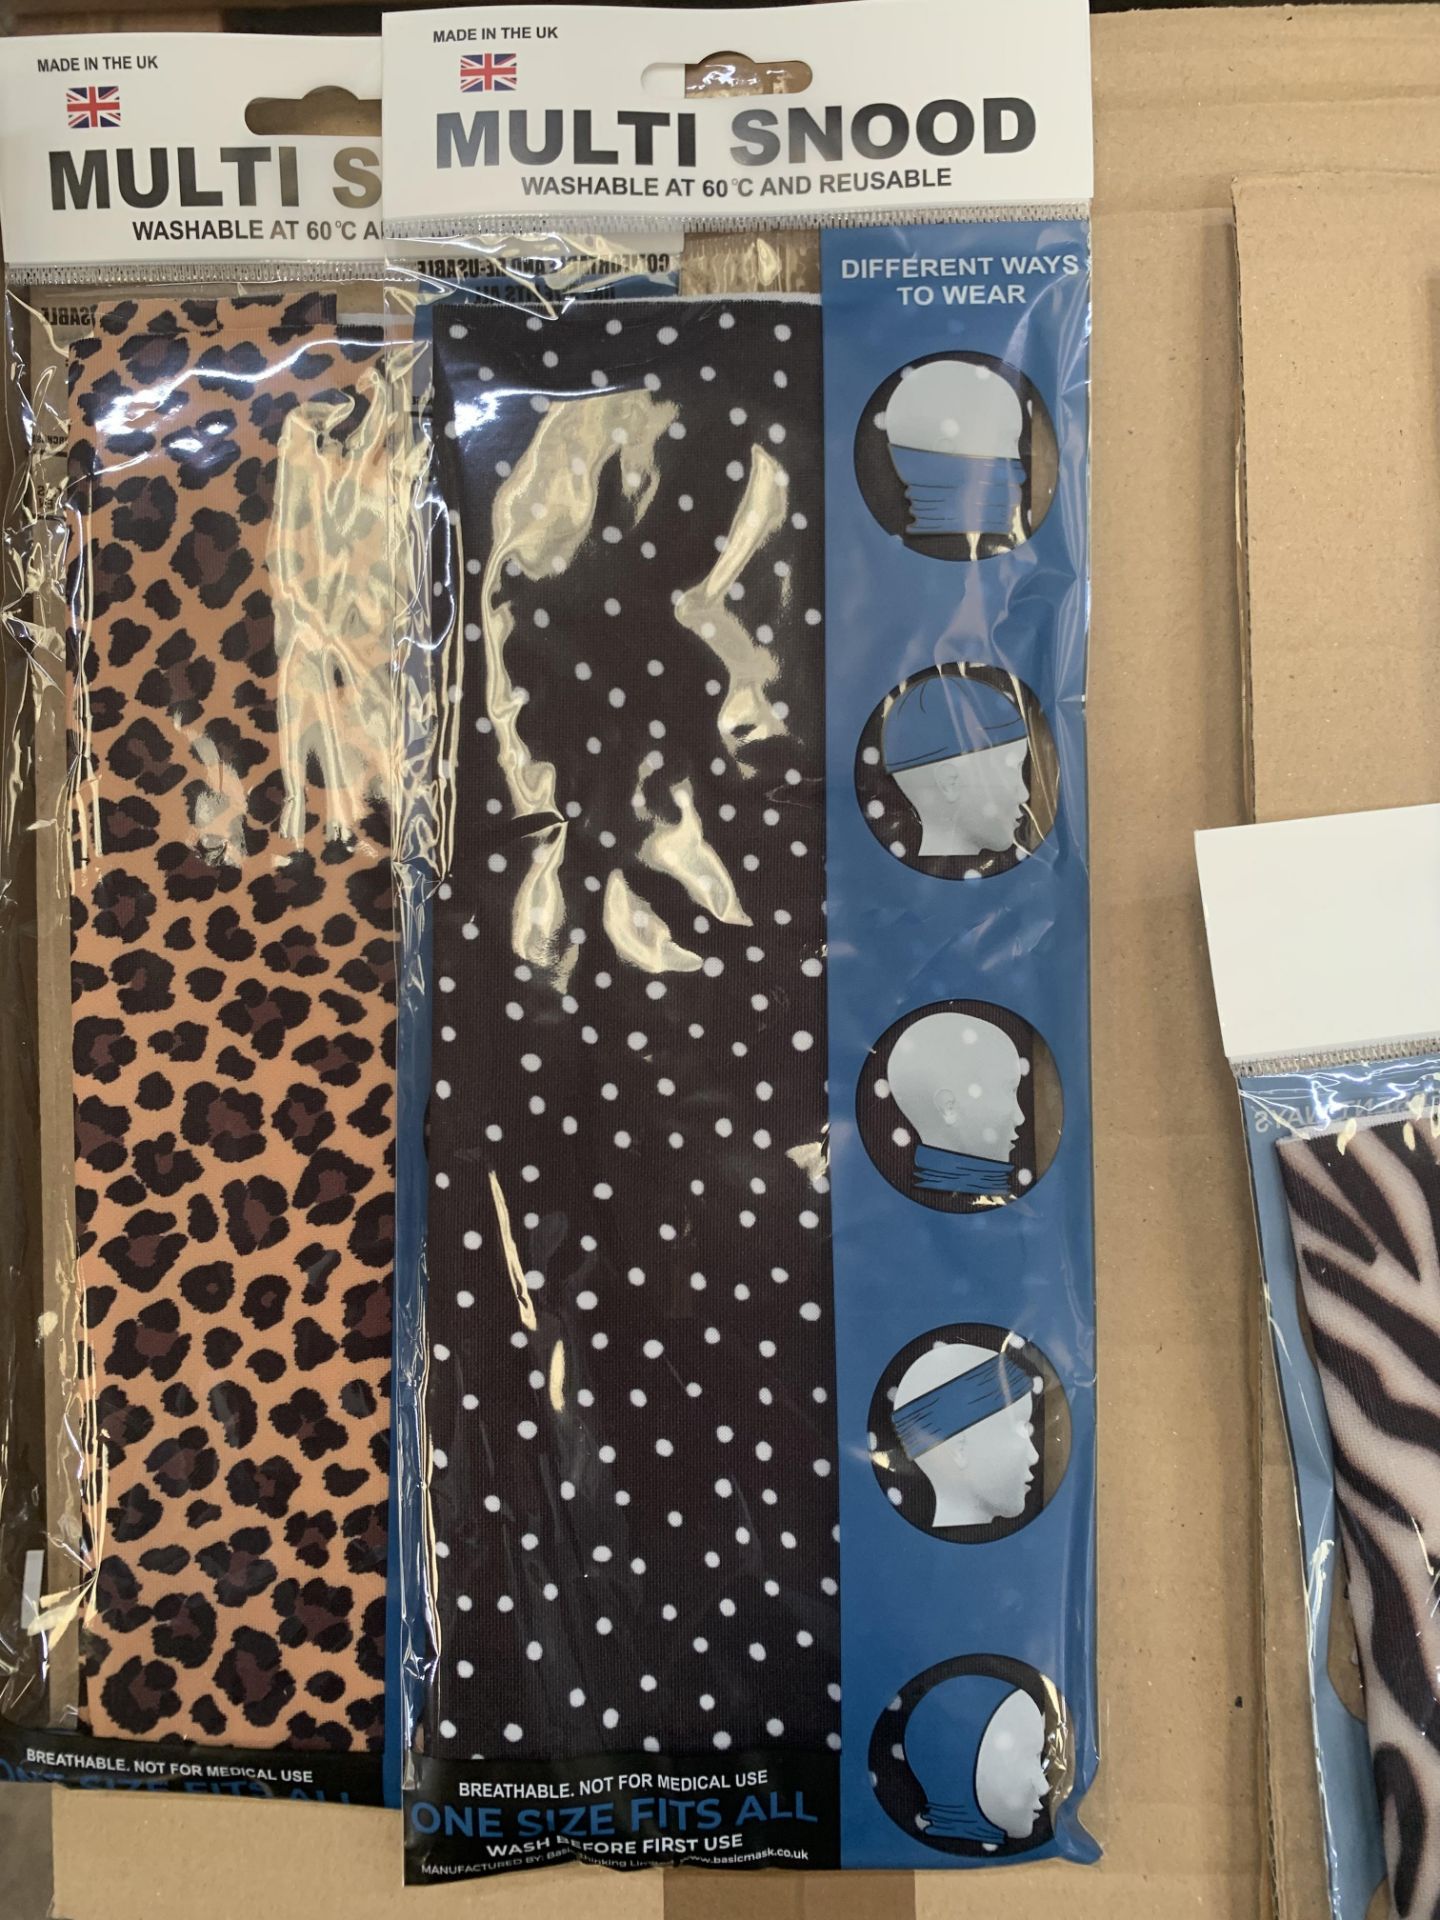 25 off multi snood face coverings, in 5 different designs - 5 each of 2 different animal prints, flo - Image 6 of 10